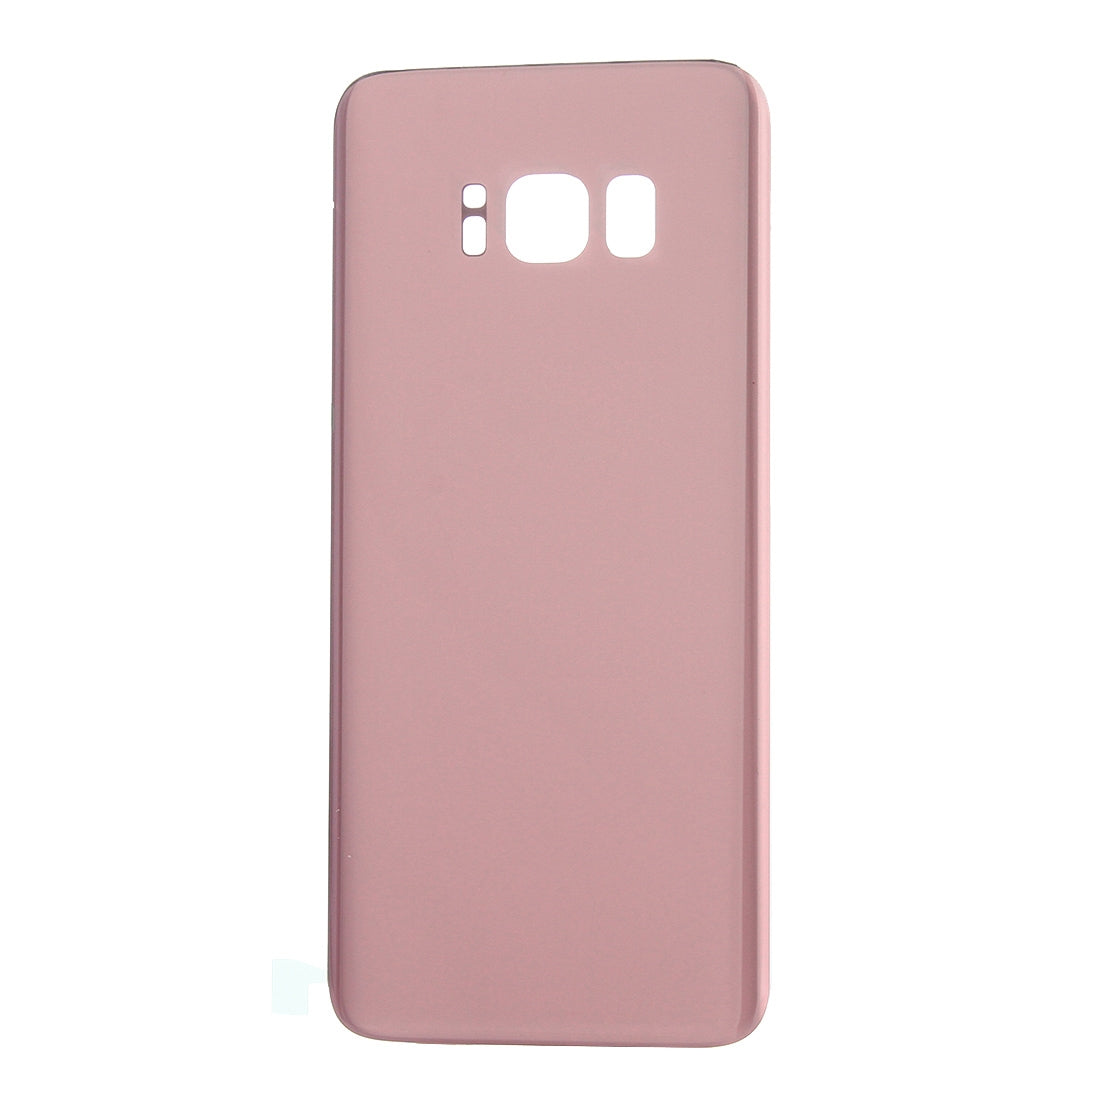 Cache Batterie Coque Arrière Samsung Galaxy S8+ / G955 Or Rose